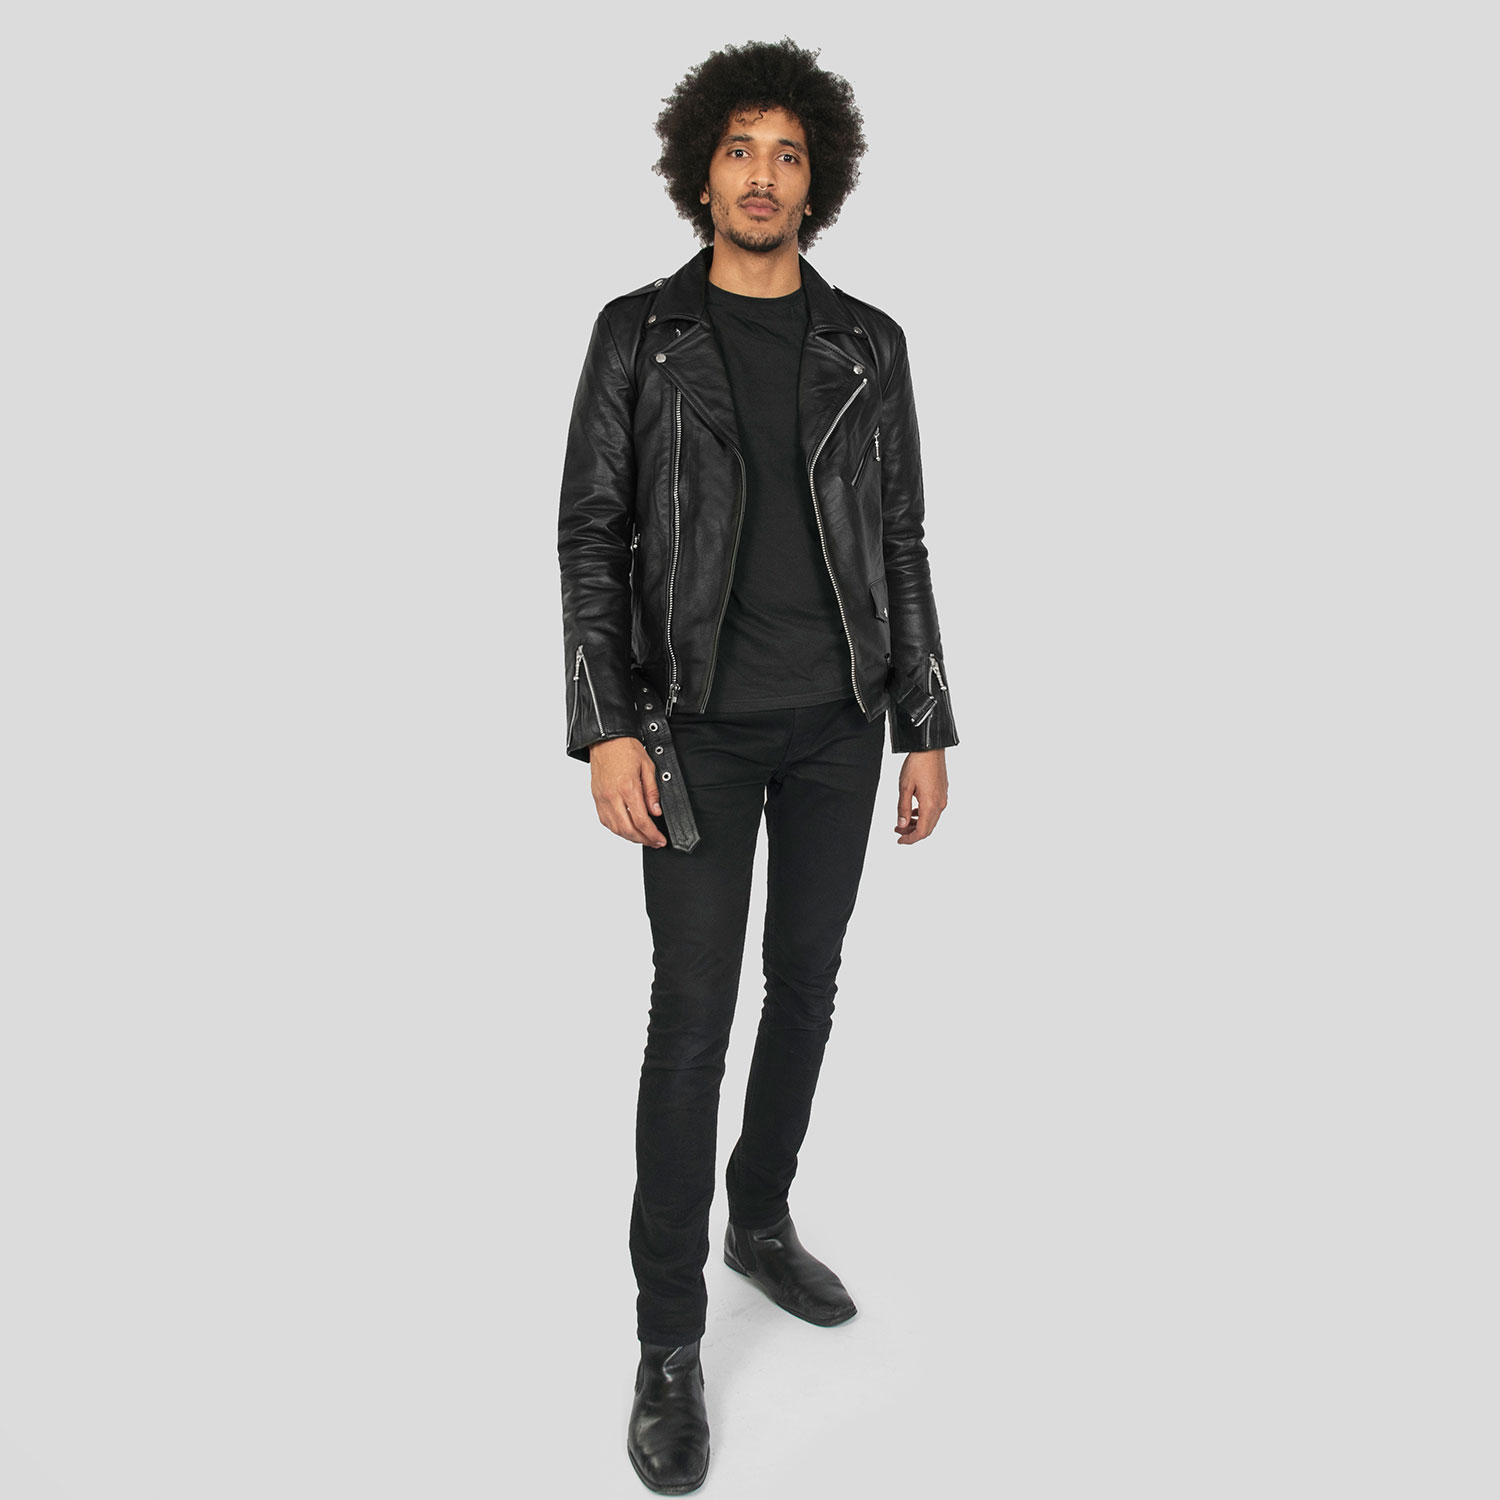 Commando Long - For Hell Tall Black Men Nickel Straight Apparel Jacket - Leather and | To